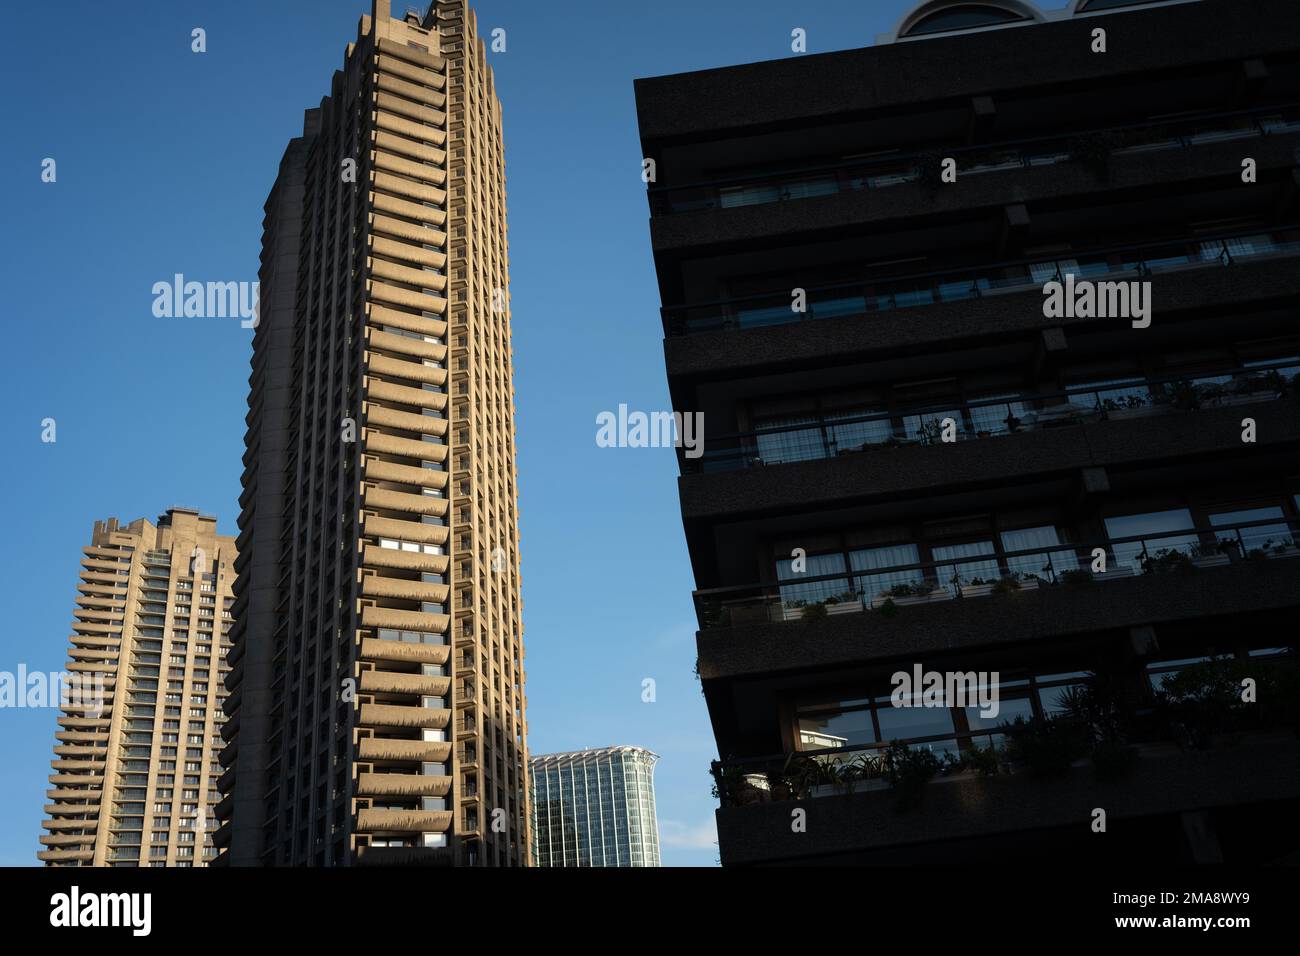 The Barbican Estate, an example of brutalist architecture in central London Stock Photo